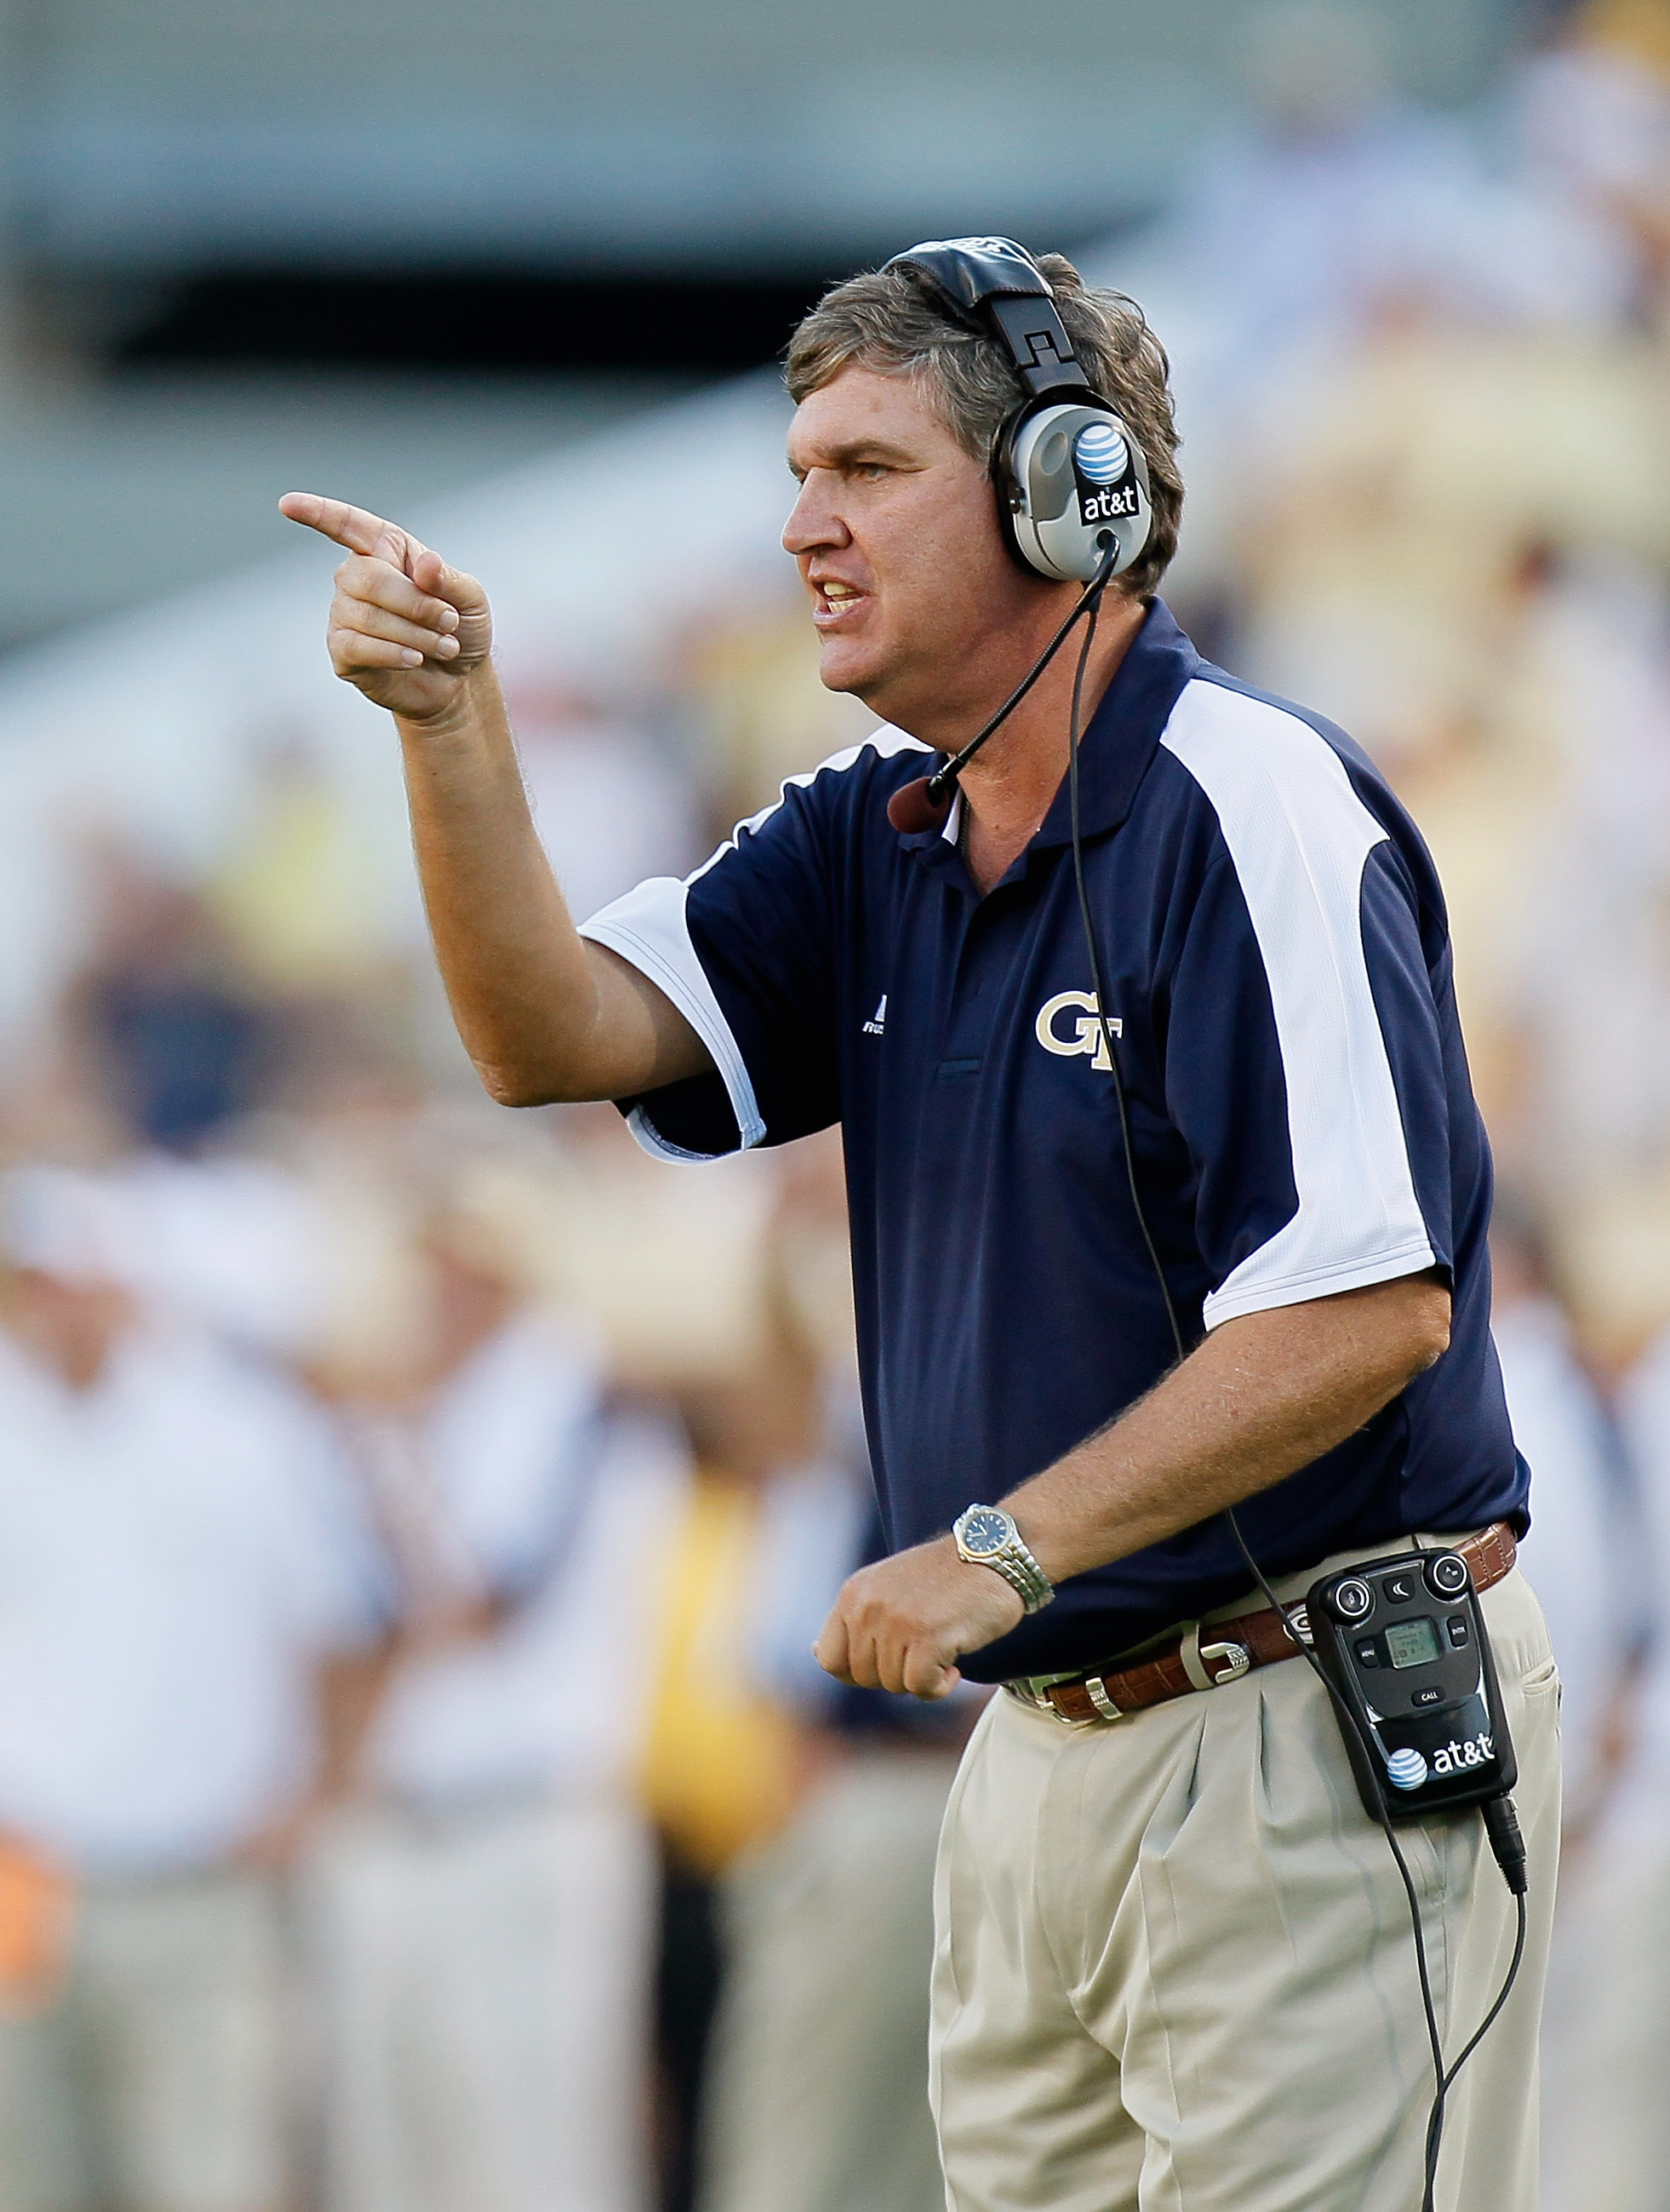 ATLANTA - OCTOBER 09:  Head coach Paul Johnson of the Georgia Tech Yellow Jackets against the Virginia Cavaliers at Bobby Dodd Stadium on October 9, 2010 in Atlanta, Georgia.  (Photo by Kevin C. Cox/Getty Images)